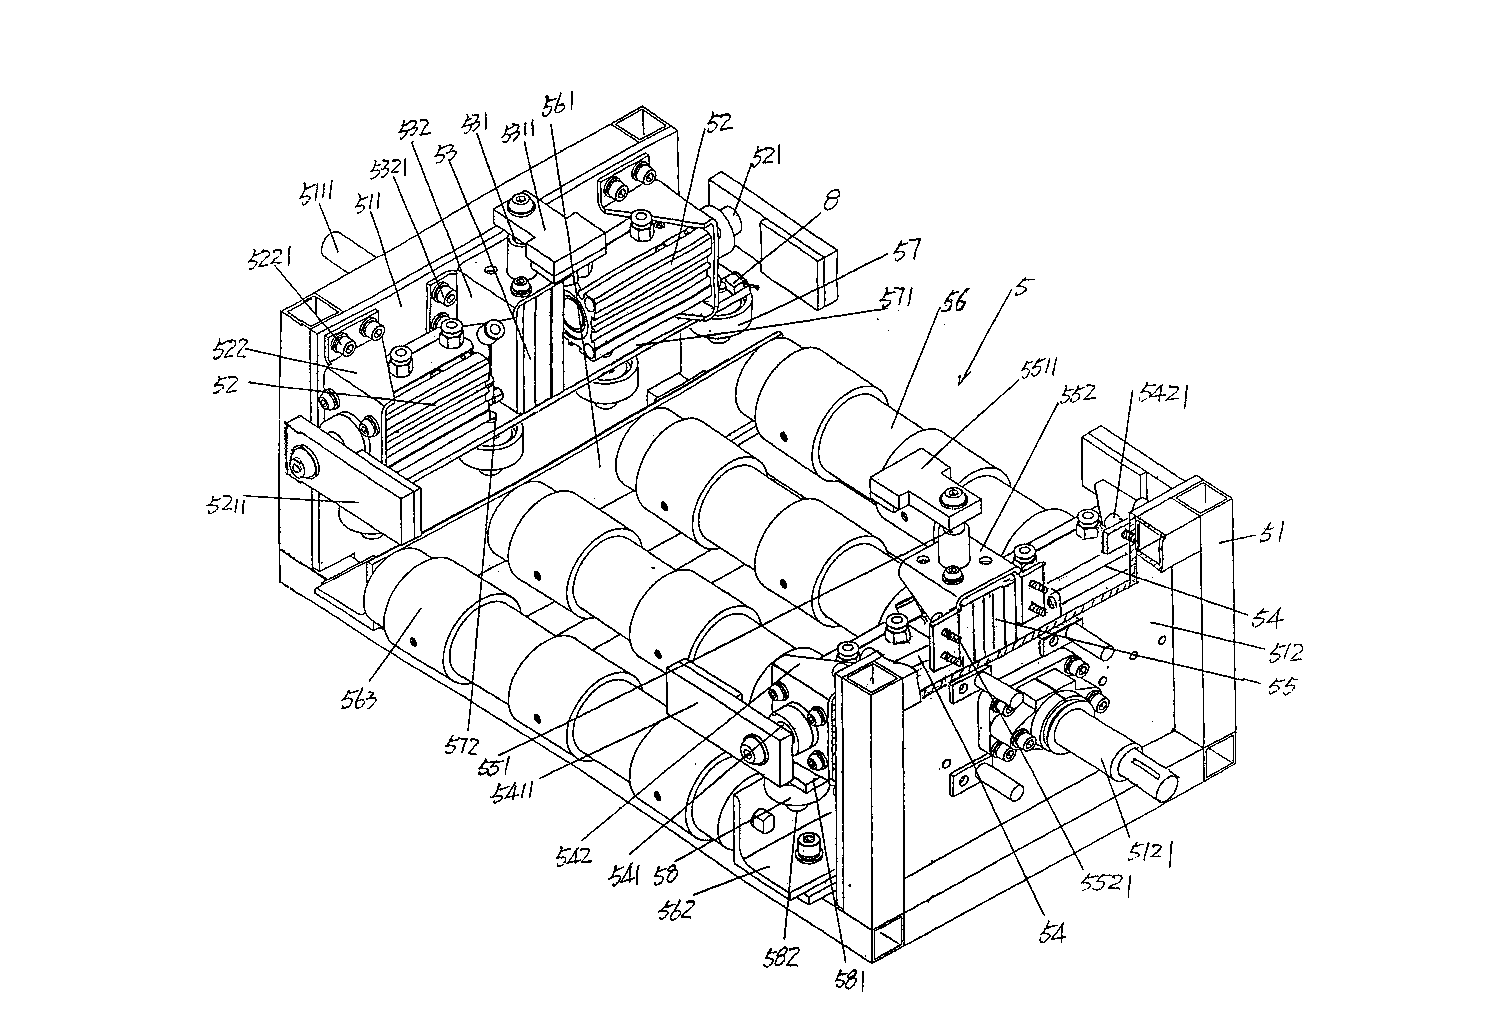 Automatic crucible dumping and cleaning system for electronic kilns